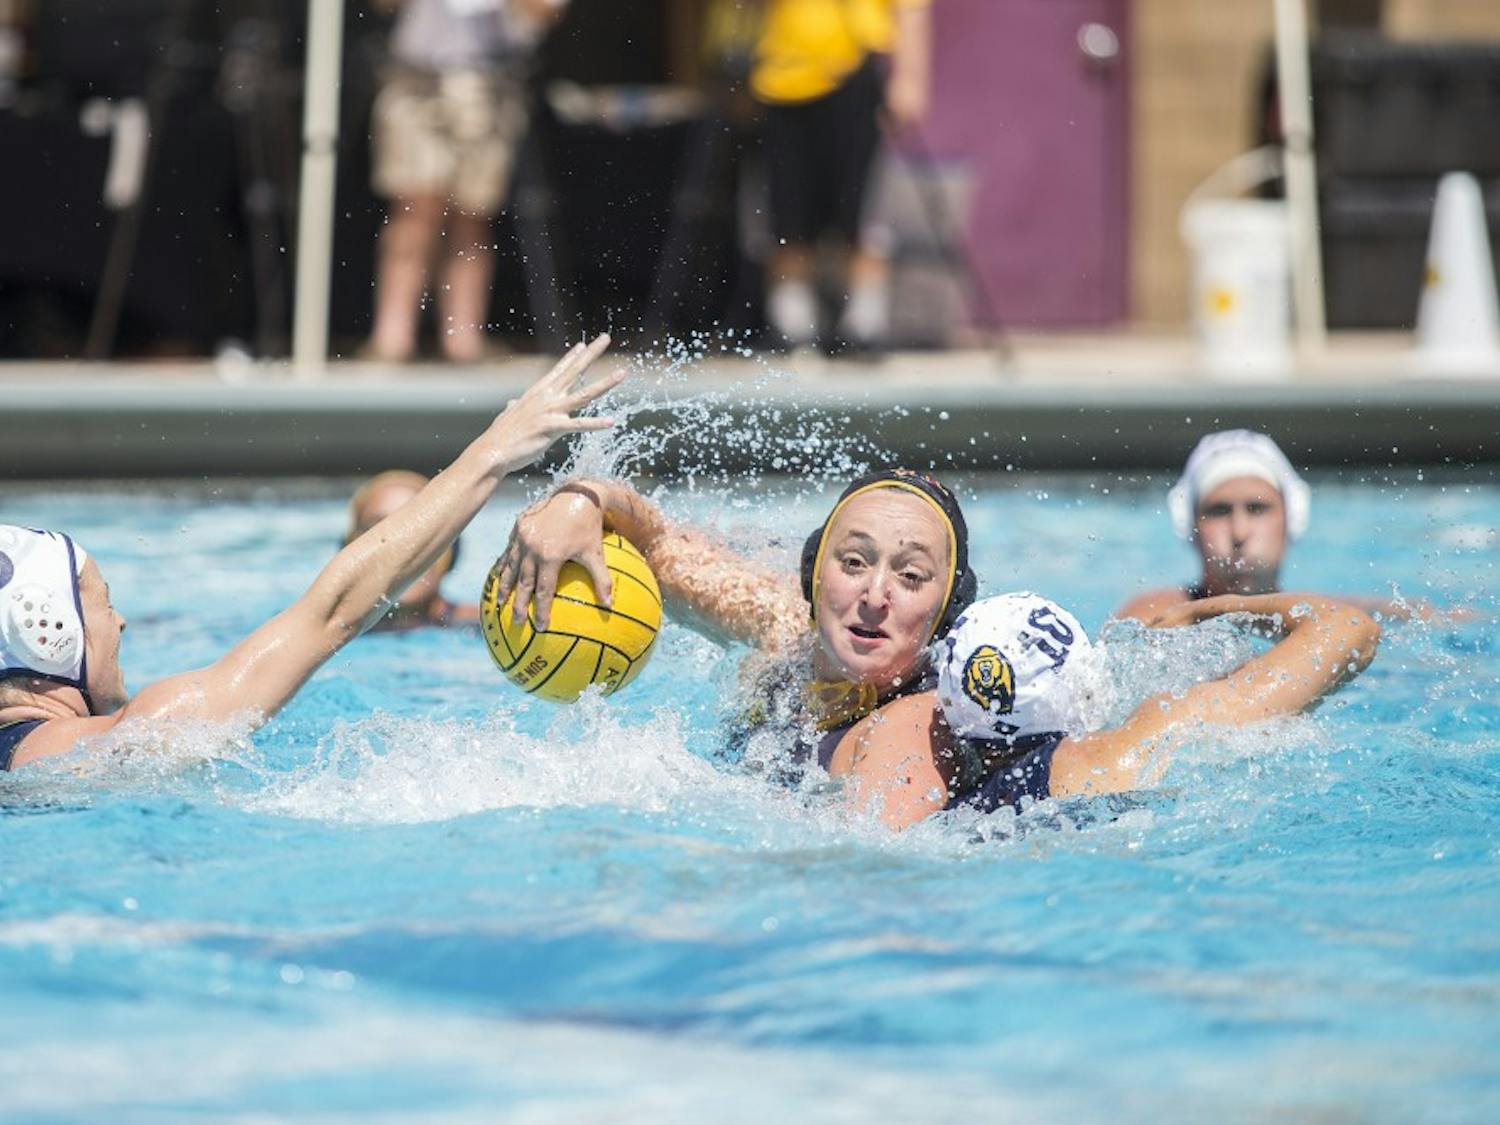 ASU defender Katie Svercheck looks to pass during a game against the Cal State Bears at Mona Plummer Aquatic Center in Tempe, Arizona, on Saturday, April 2, 2016. The Sun Devils won the match, 7-6, in sudden-death overtime. 